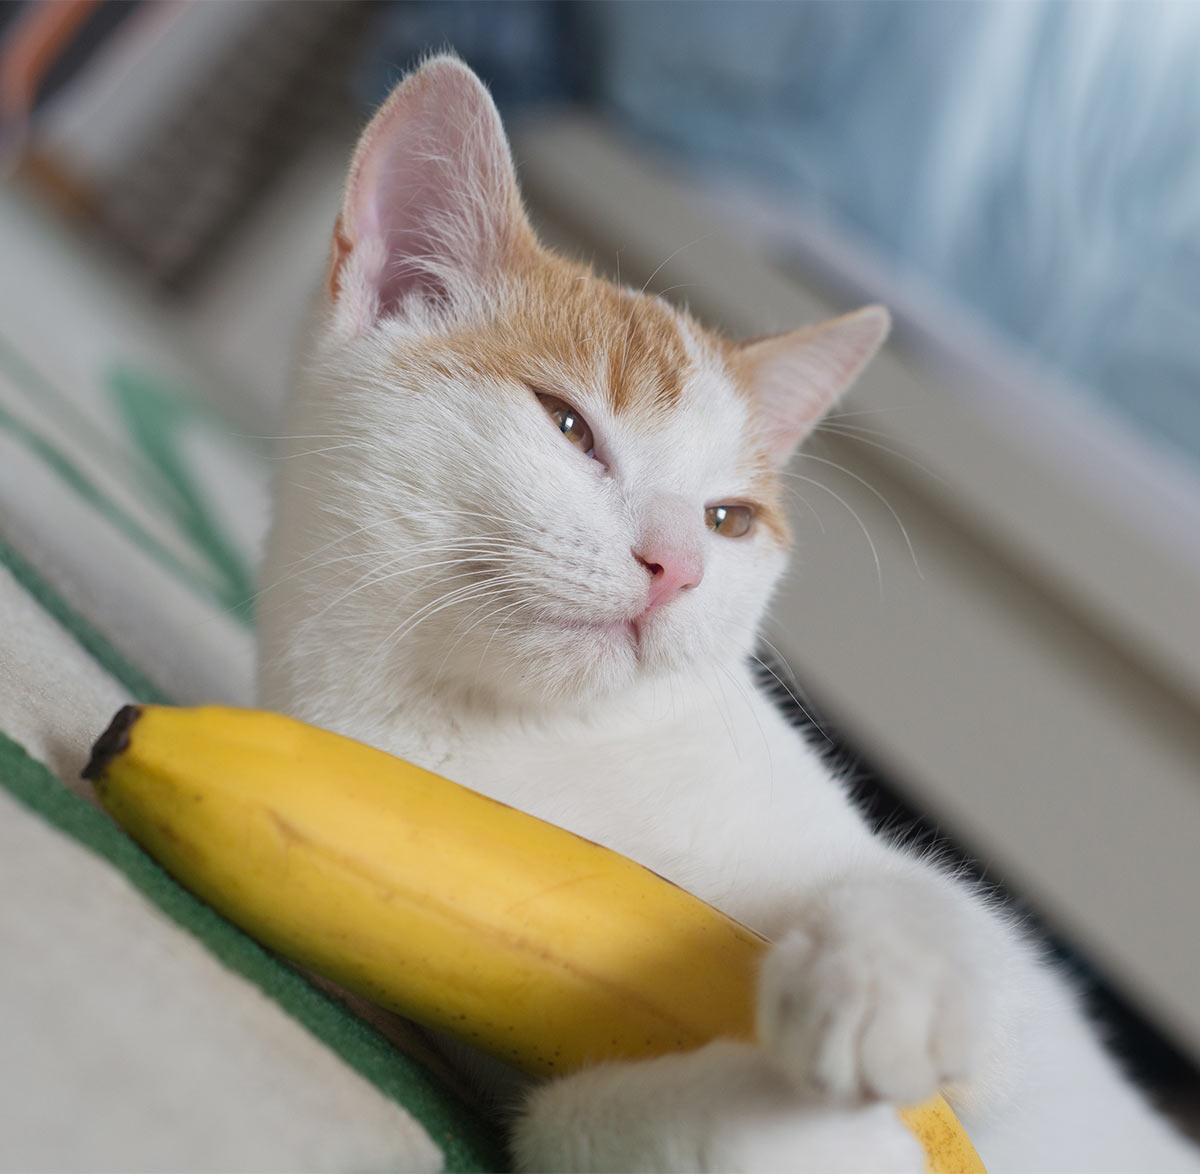 Can Cats Eat Bananas 4 Keys To Feeding The Fruit To Your Cat Safely Daily Paws